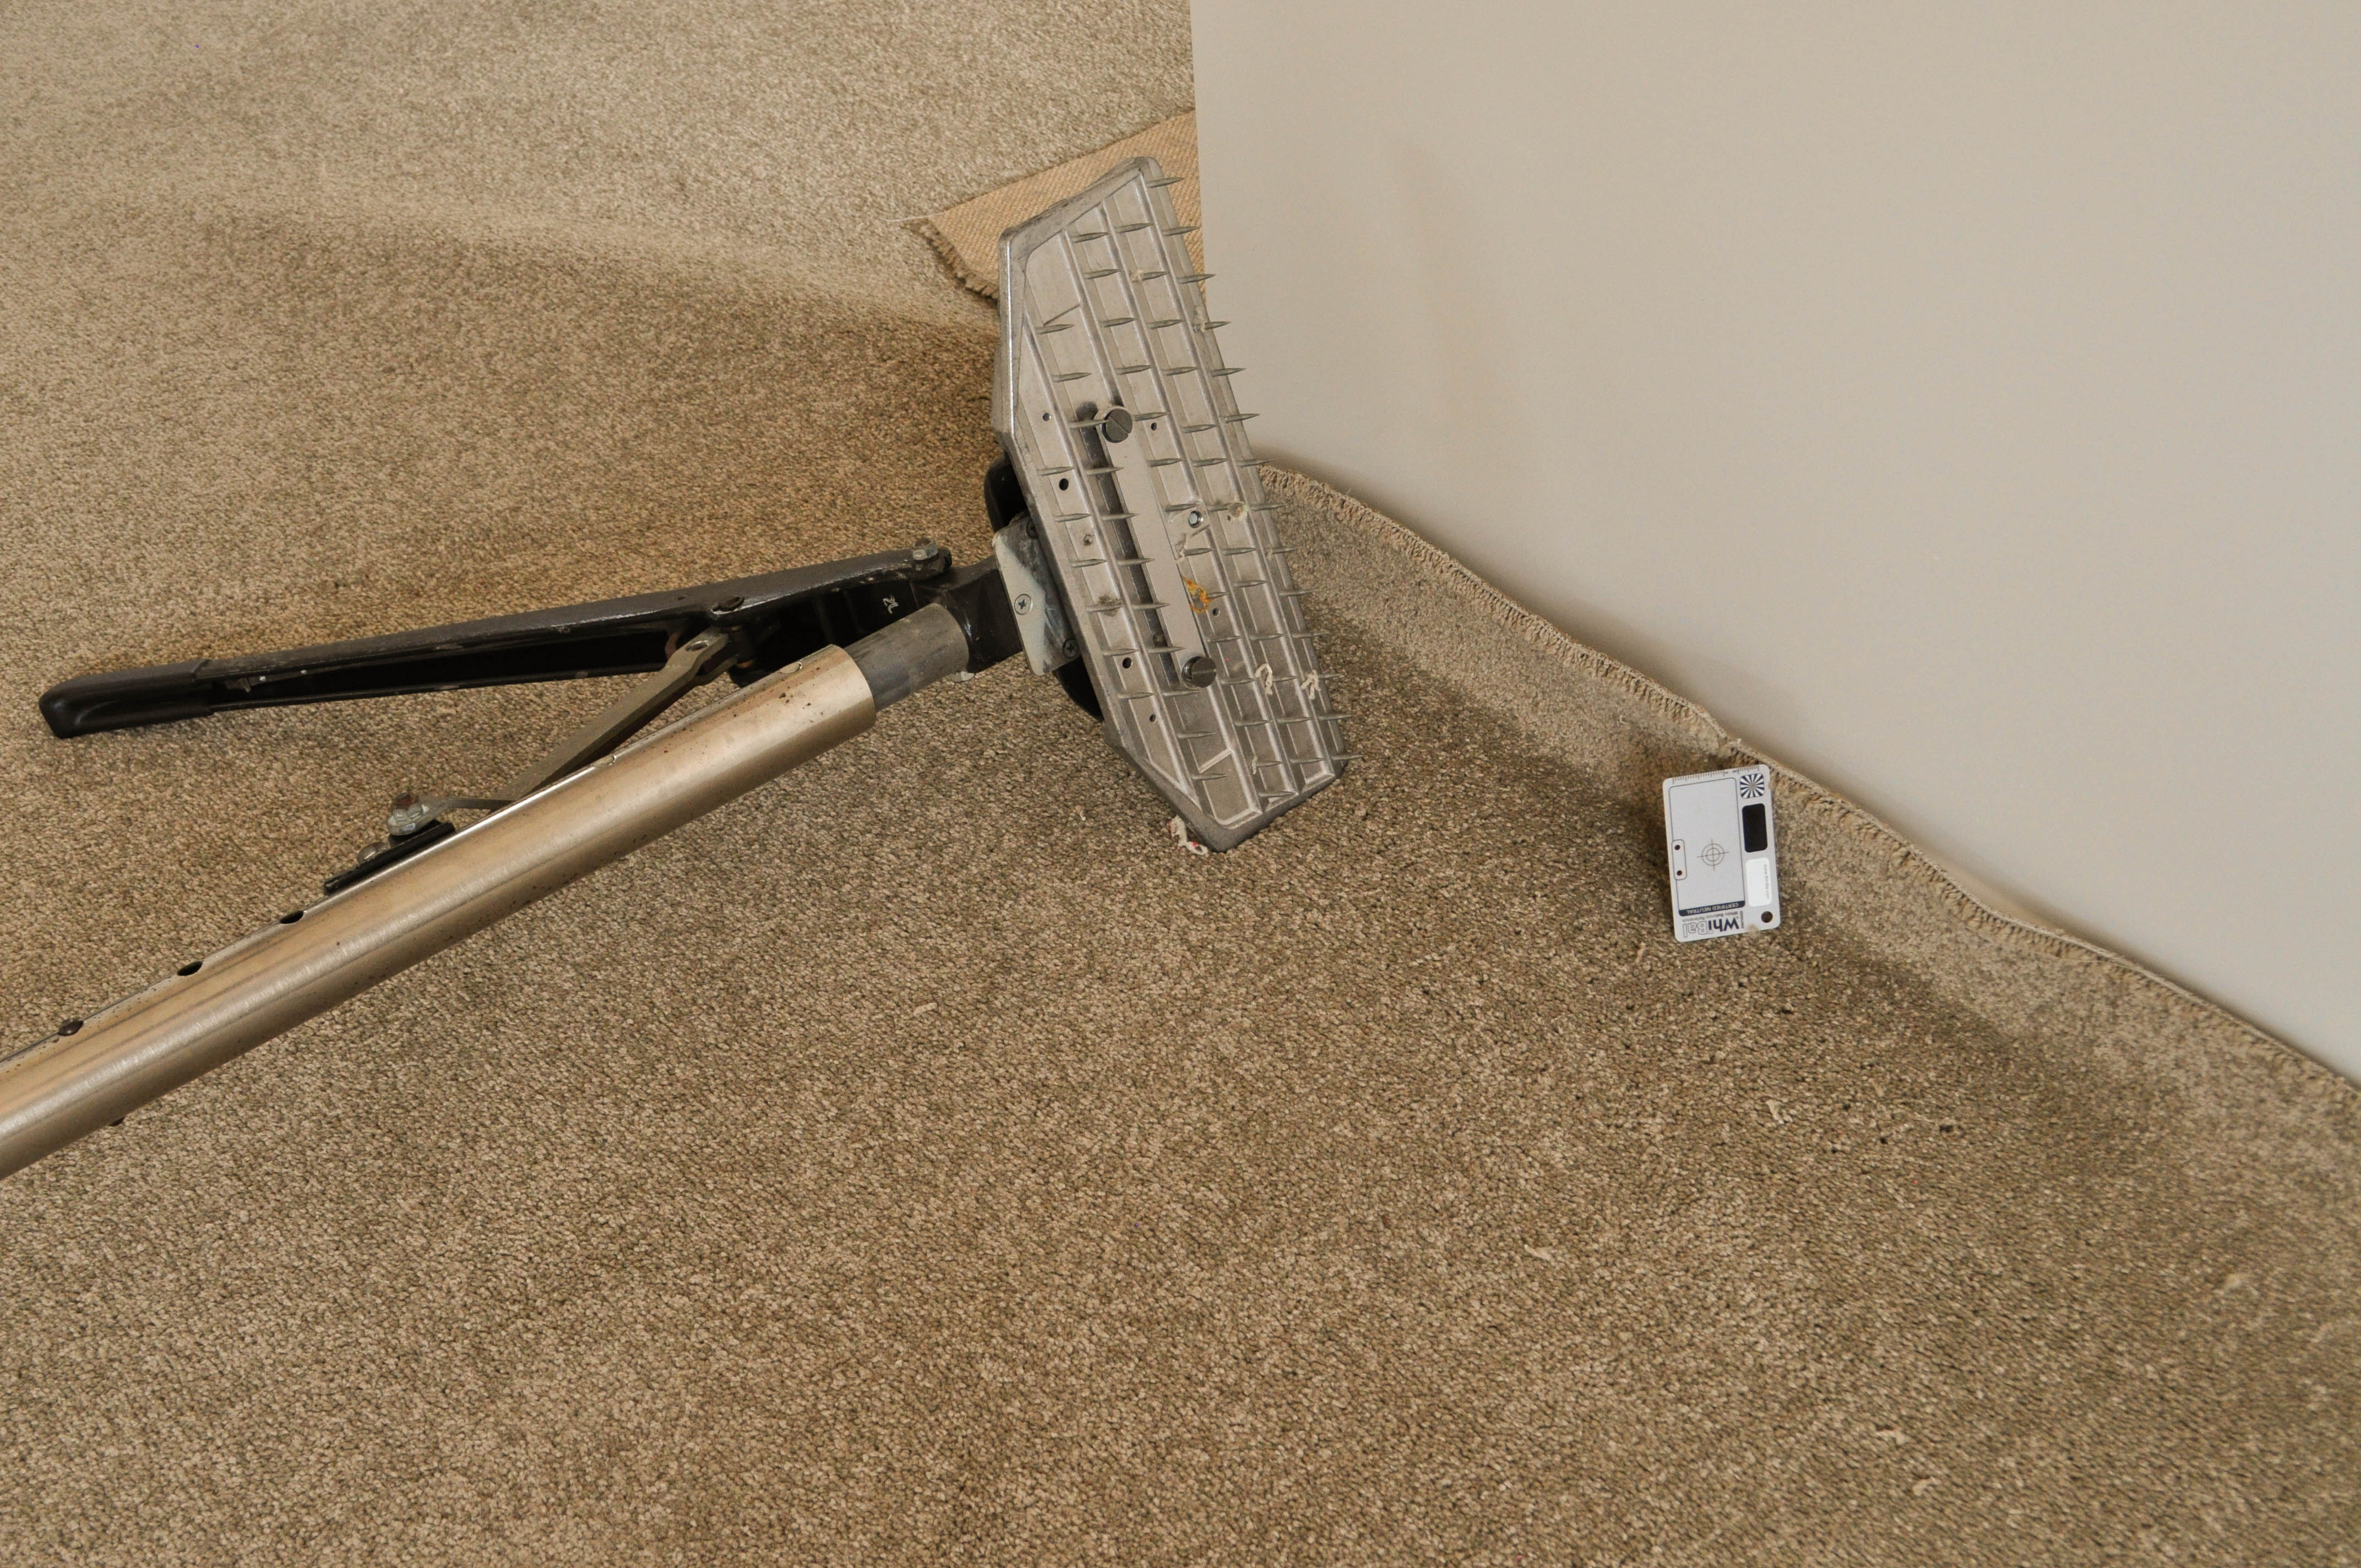 a slab of carpet with ripples in it, in a room that has been lifted of the gripper and where the telescopic head of the power stretcher
has been applied against the carpet gripping it and stretching it. The picture shows the teeth or spikes of the power stretcher that grip the carpet.